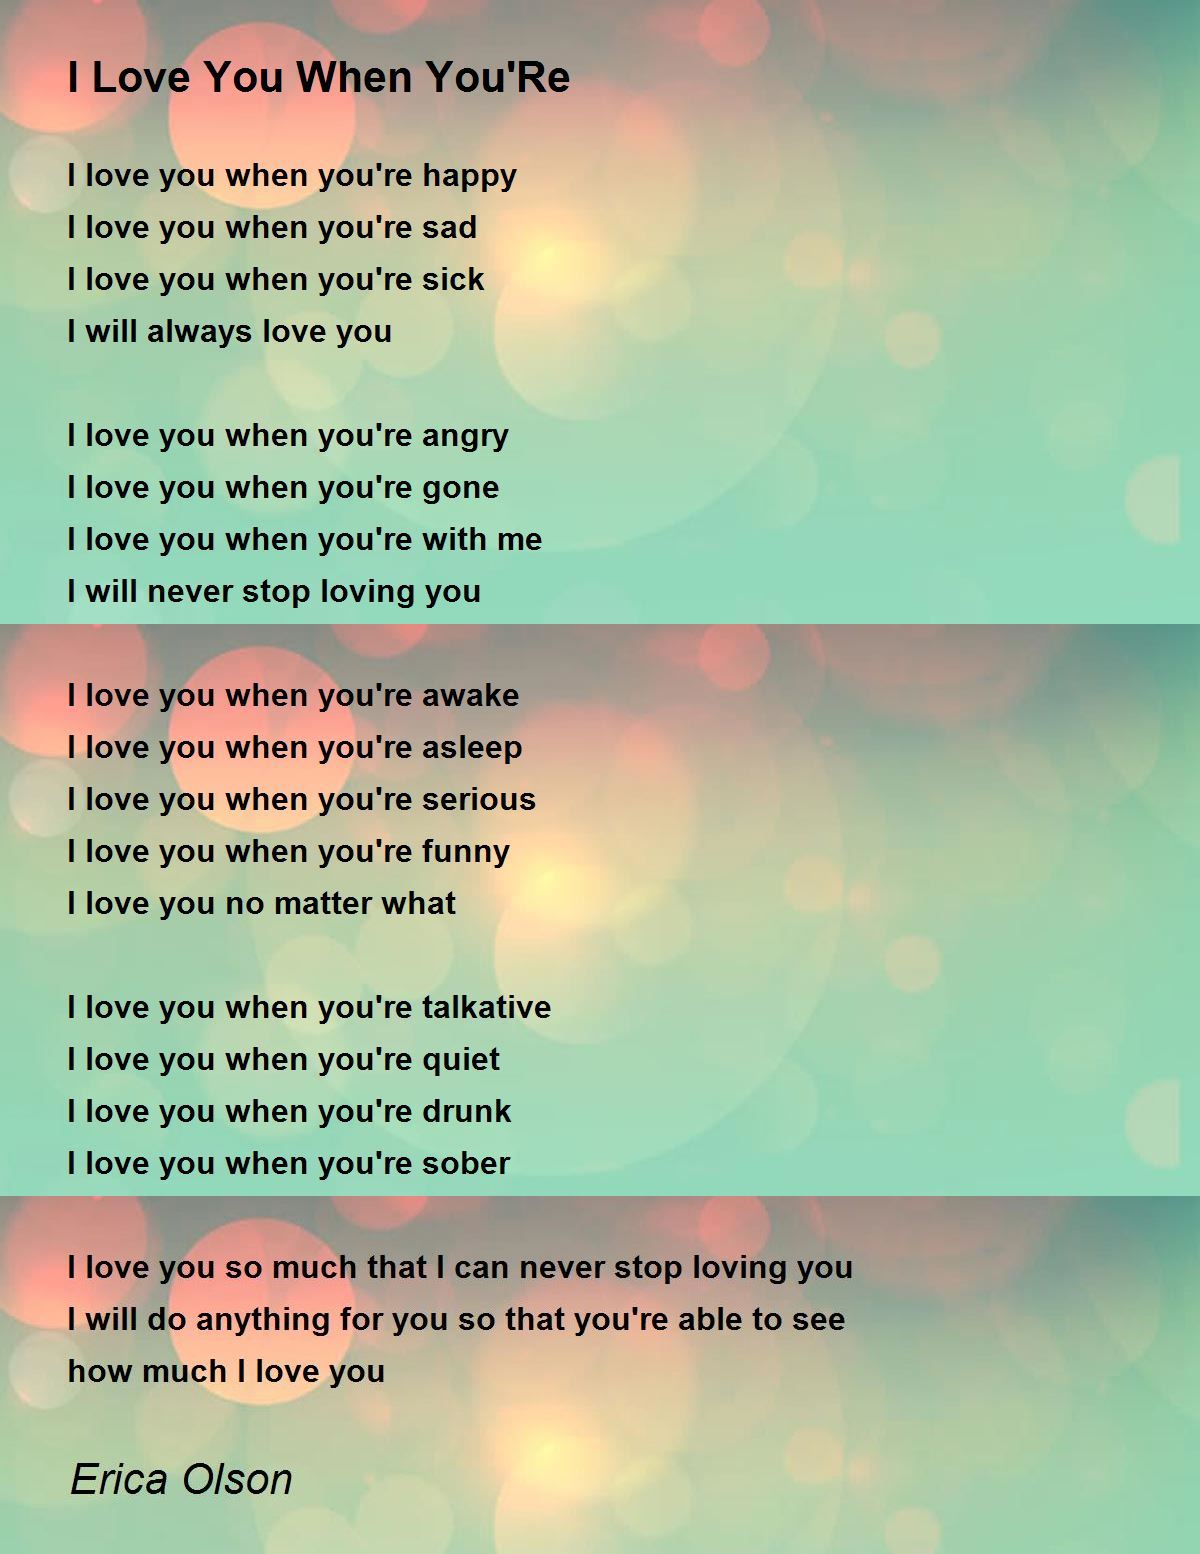 I Love You When You'Re - I Love You When You'Re Poem by Erica Olson